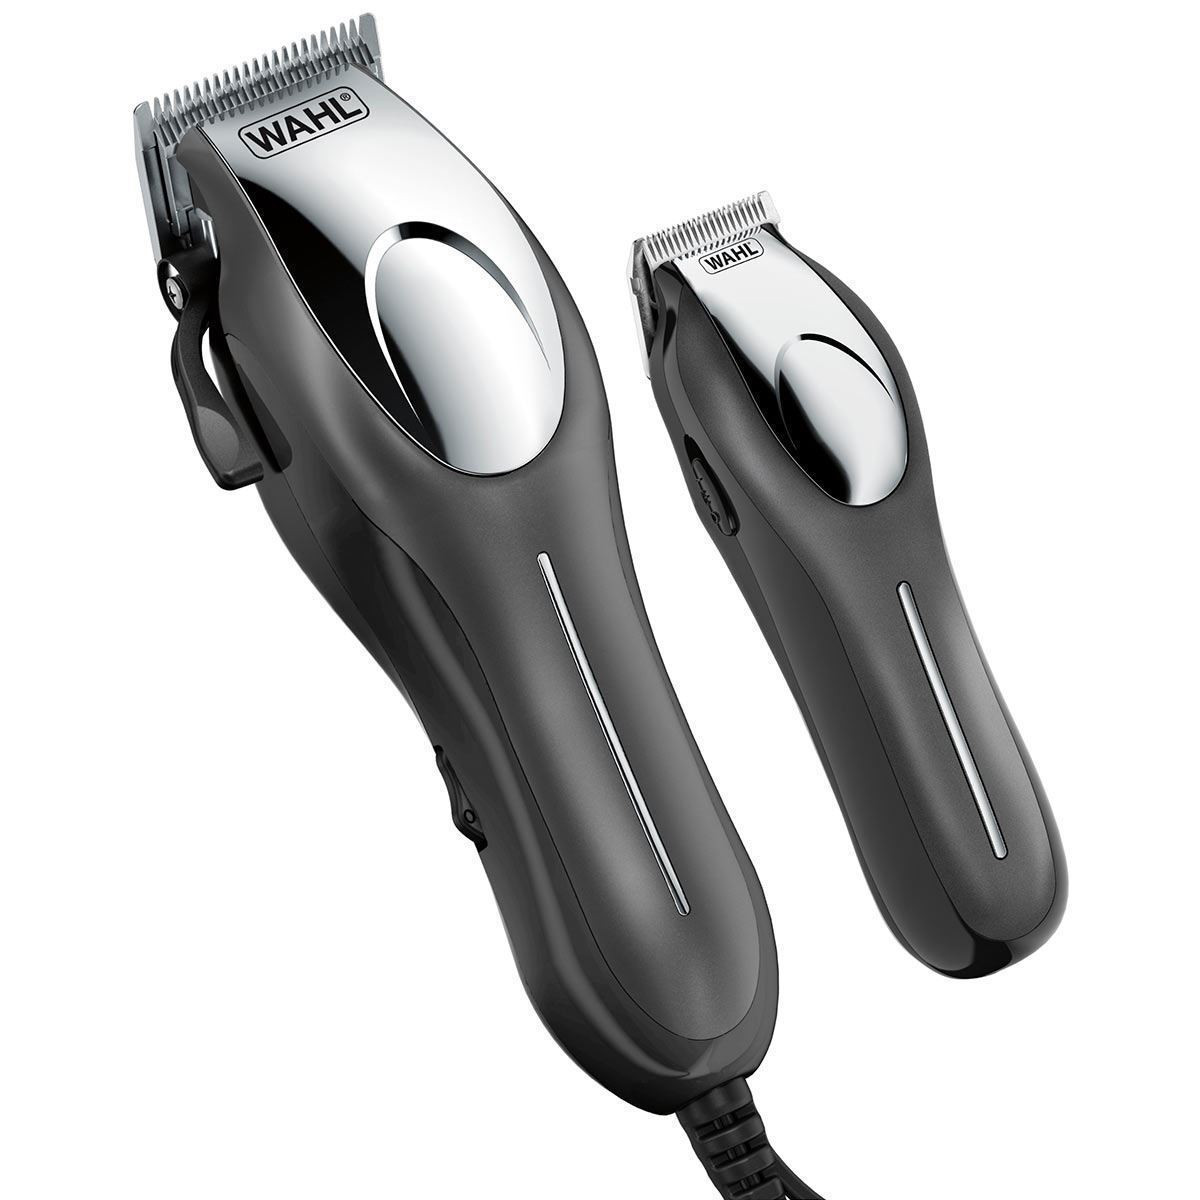 haircutting clippers kit